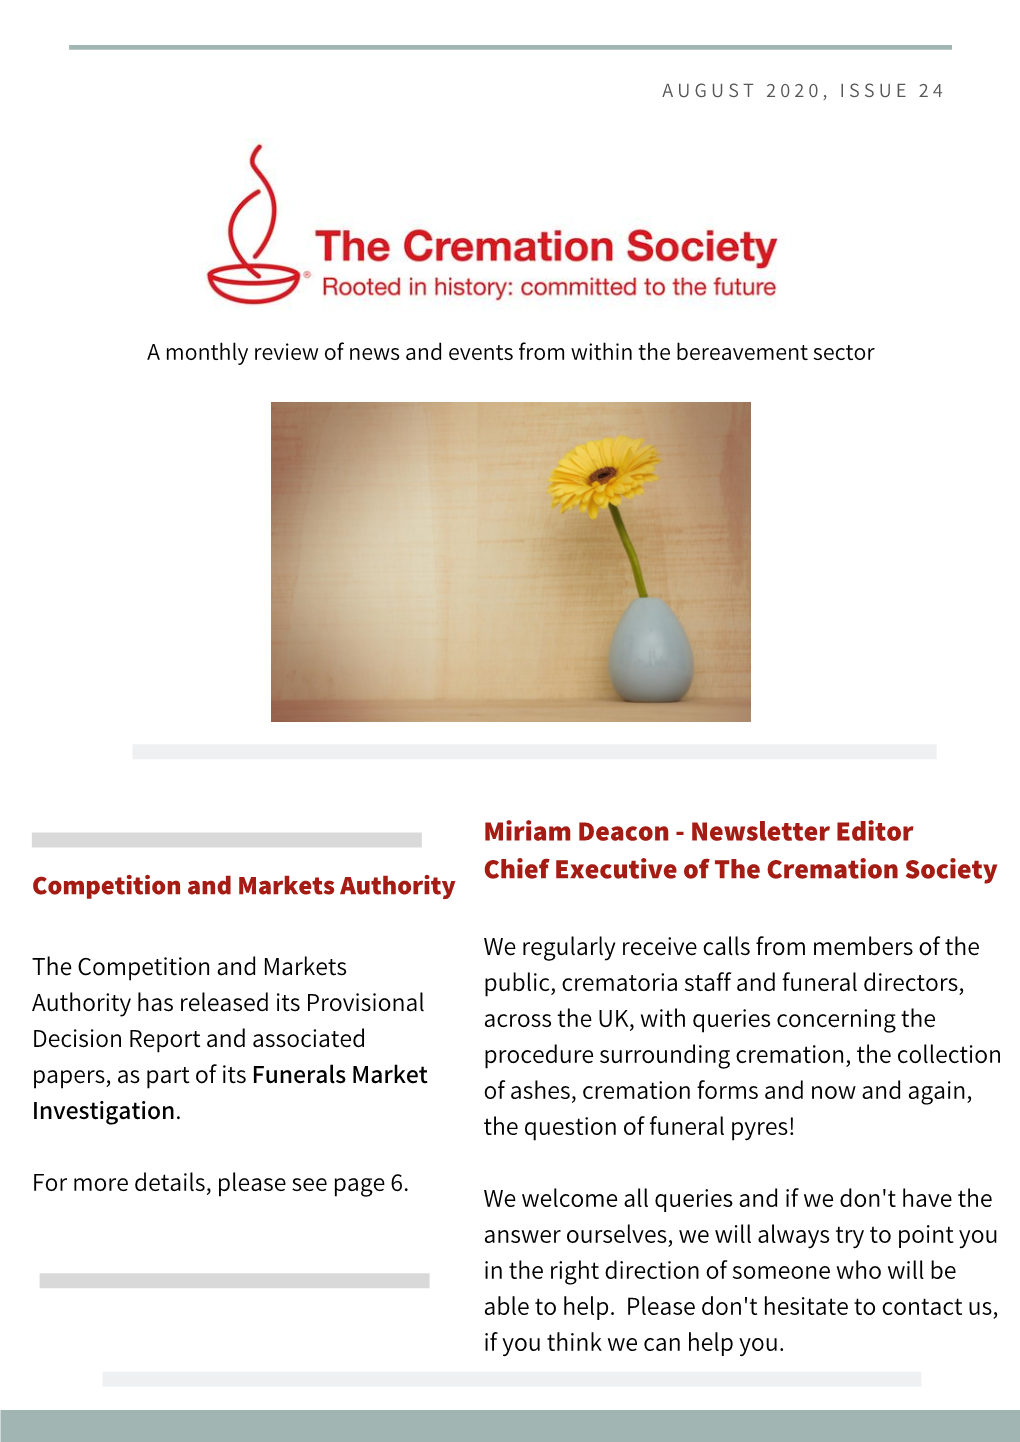 Miriam Deacon - Newsletter Editor Chief Executive of the Cremation Society Competition and Markets Authority